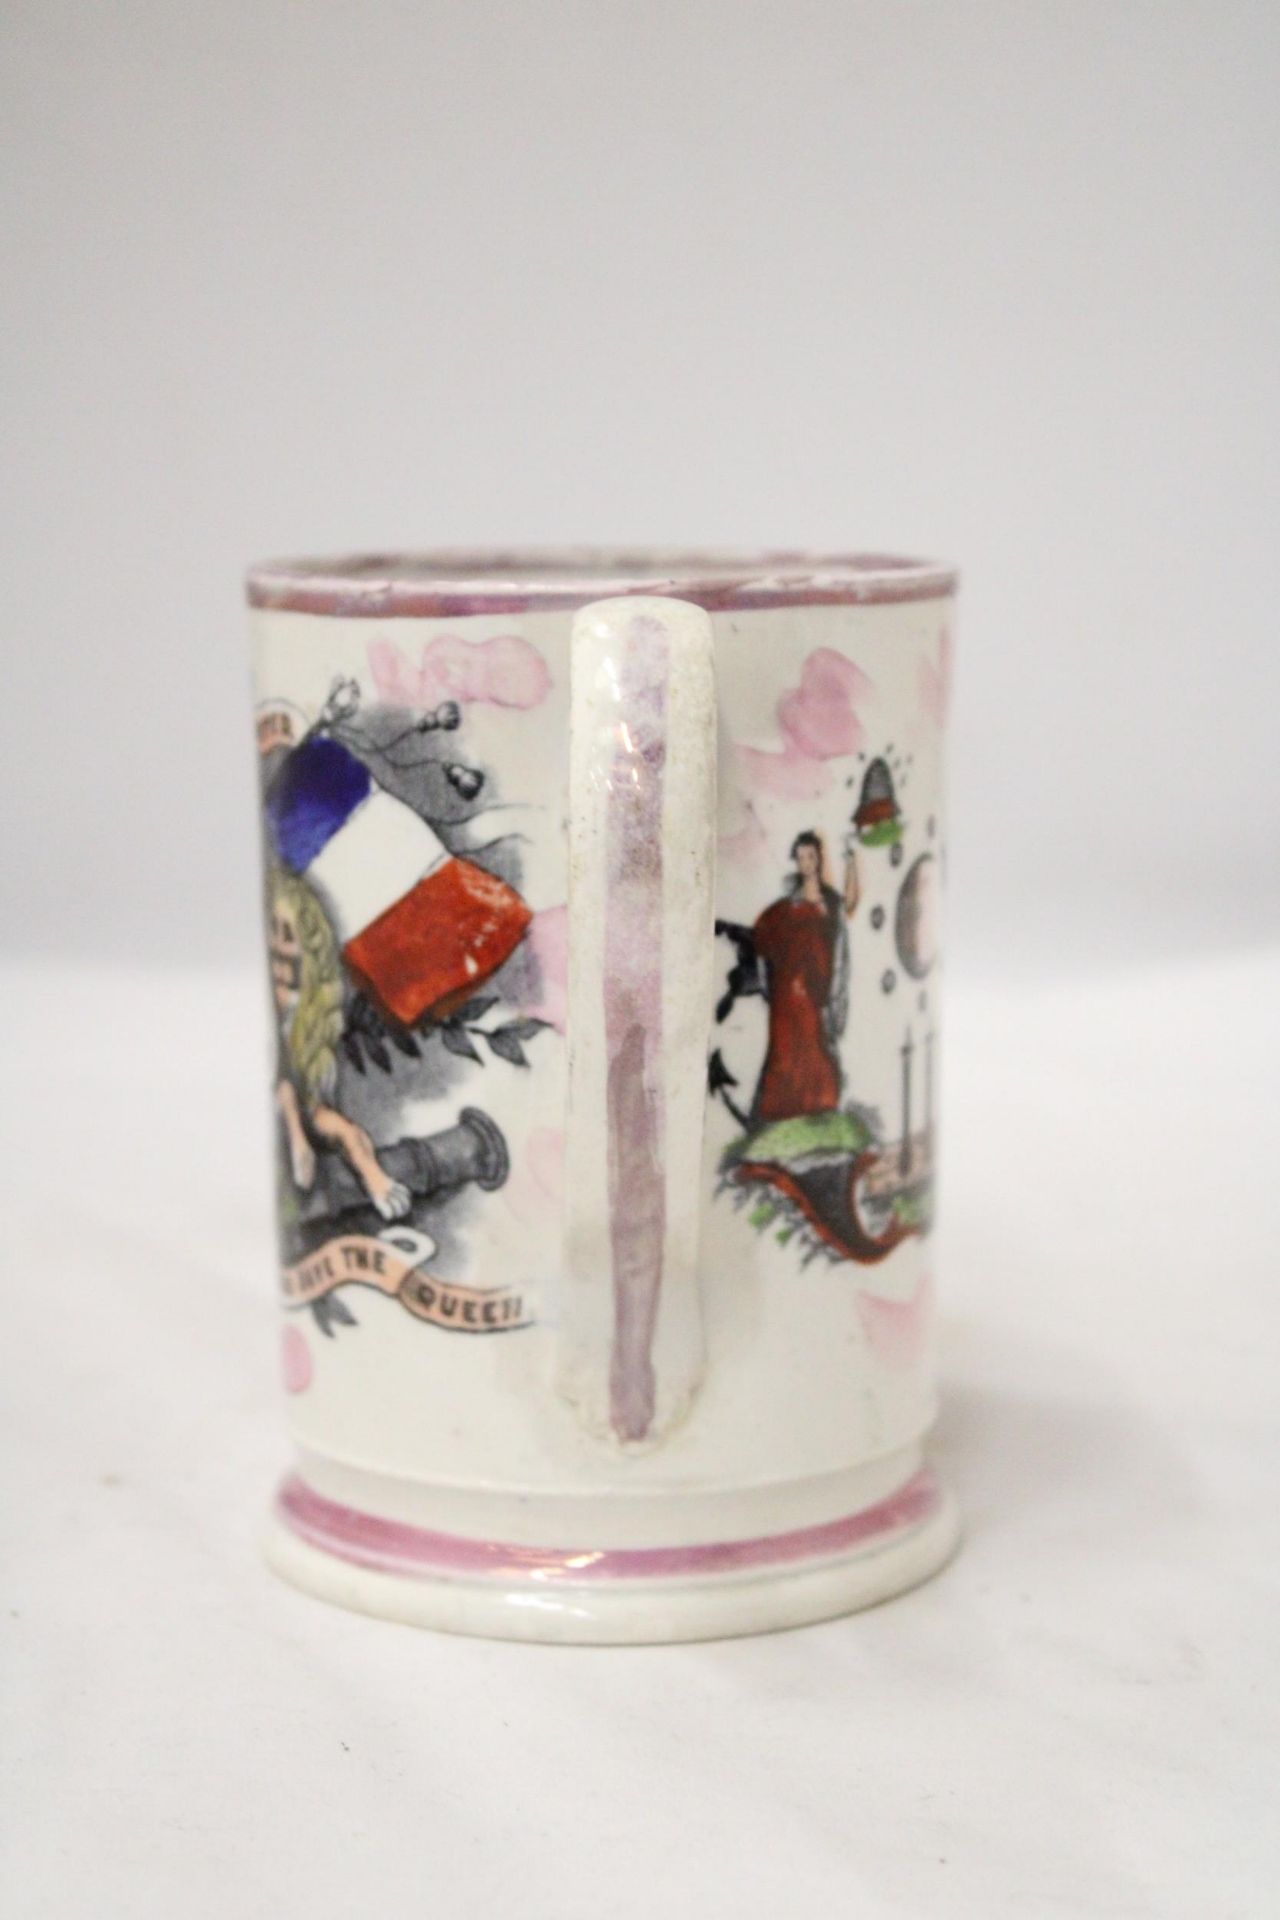 A 19TH CENTURY STAFFORDSHIRE POTTERY FROG MUG WITH 'GOD SAVE THE QUEEN' EMBLEM - Image 4 of 5